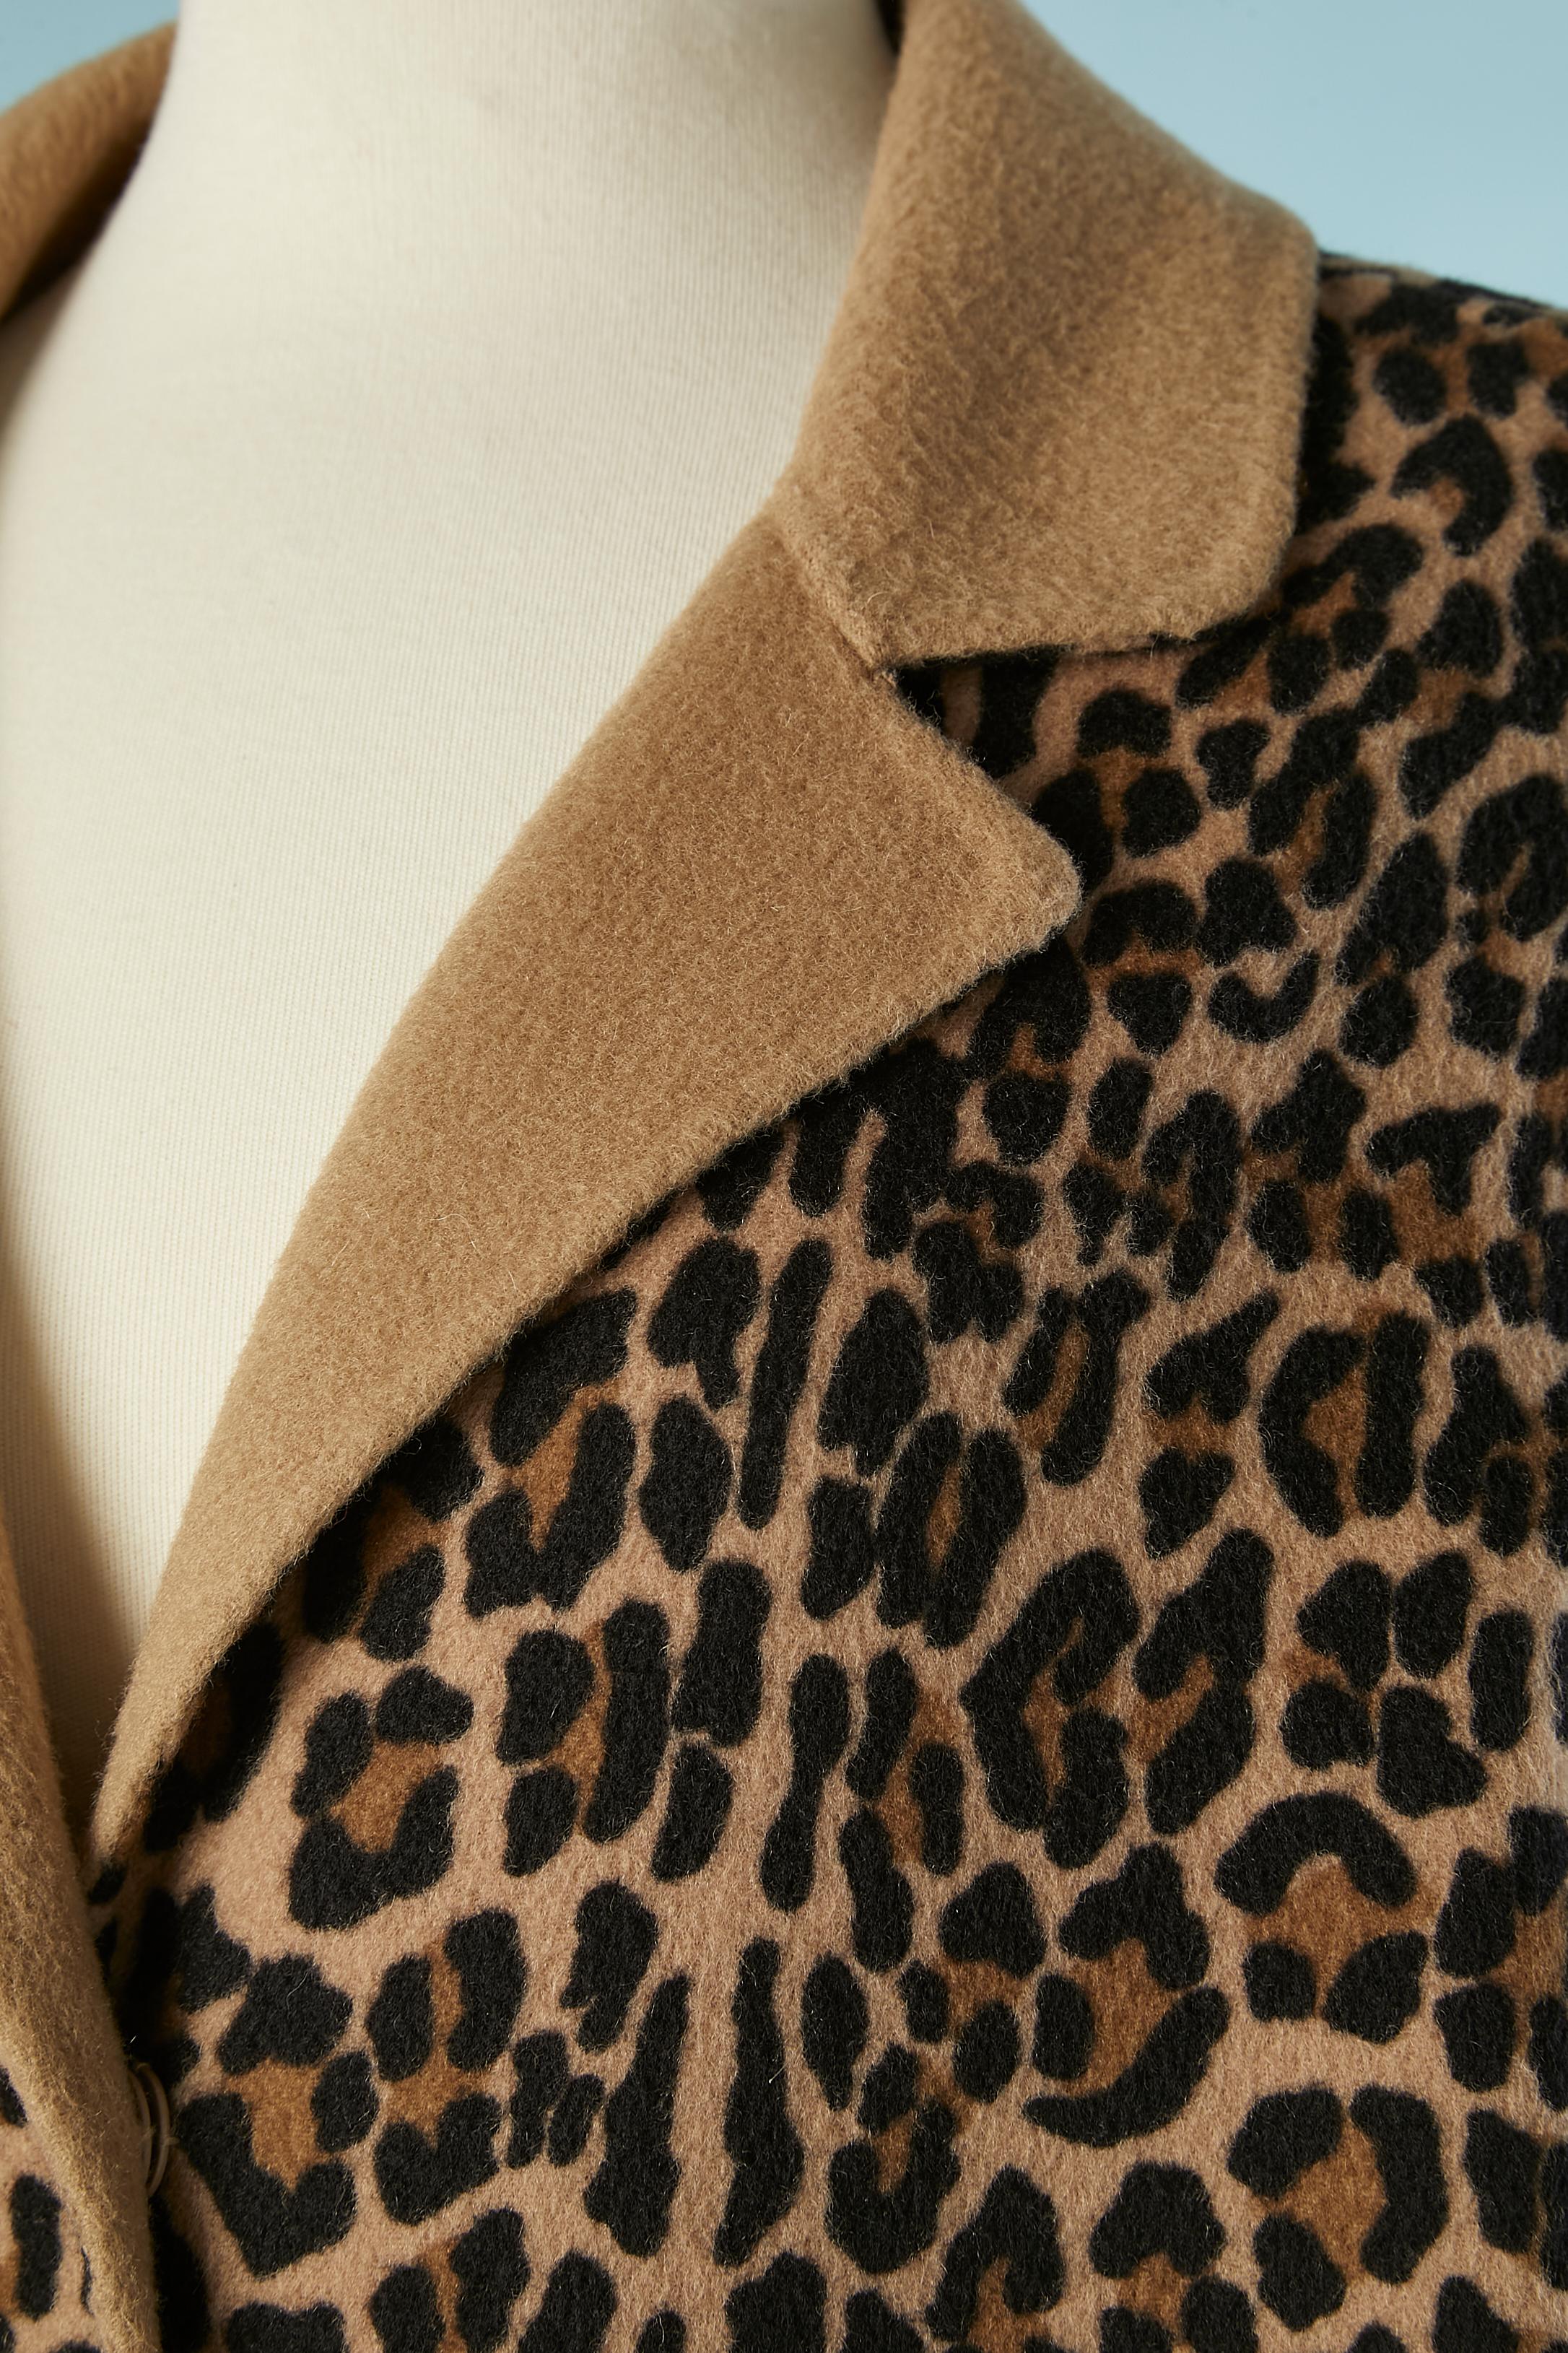 Single breasted double-face wool coat with leopard pattern. Pockets on both side. Snap in the middle front. 
Fabric composition: 80% wool, 20% nylon
Lining ( on the shoulder and pockets): Polyester
HANDMADE
SIZE M 